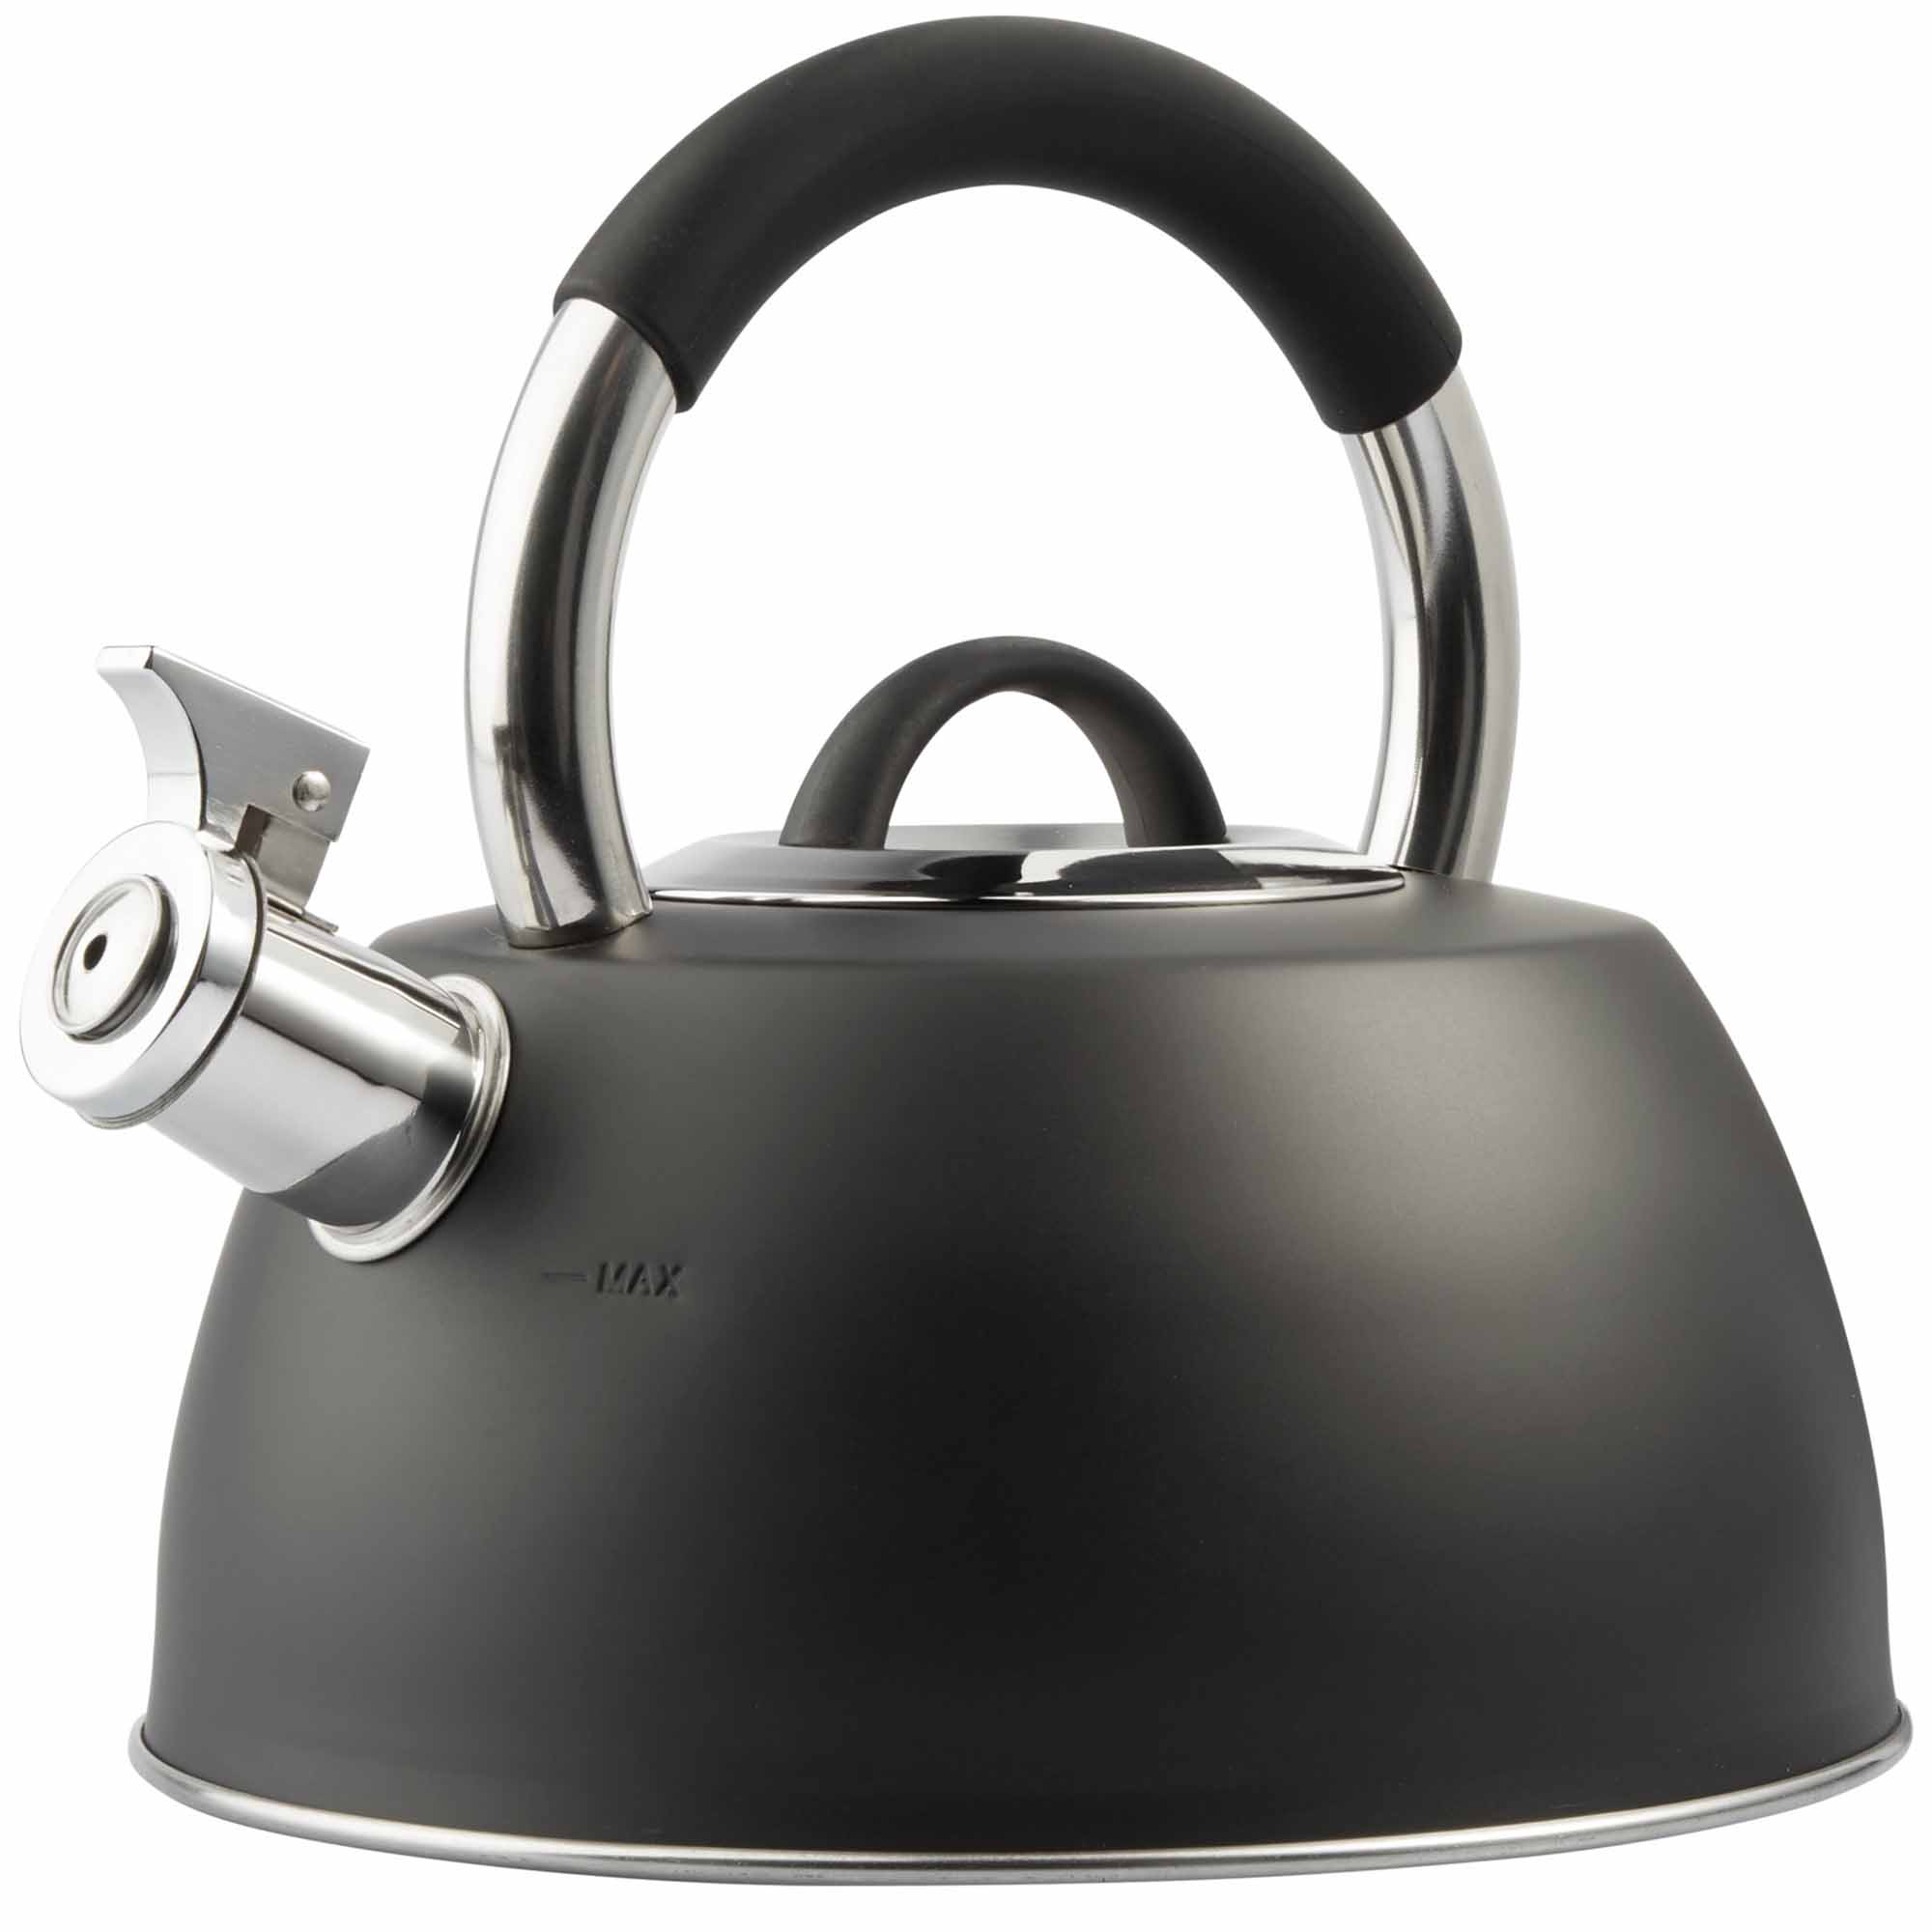 VonShef Stainless Steel Stove Top Kettle - Black Retro Style Whistling Kettle 